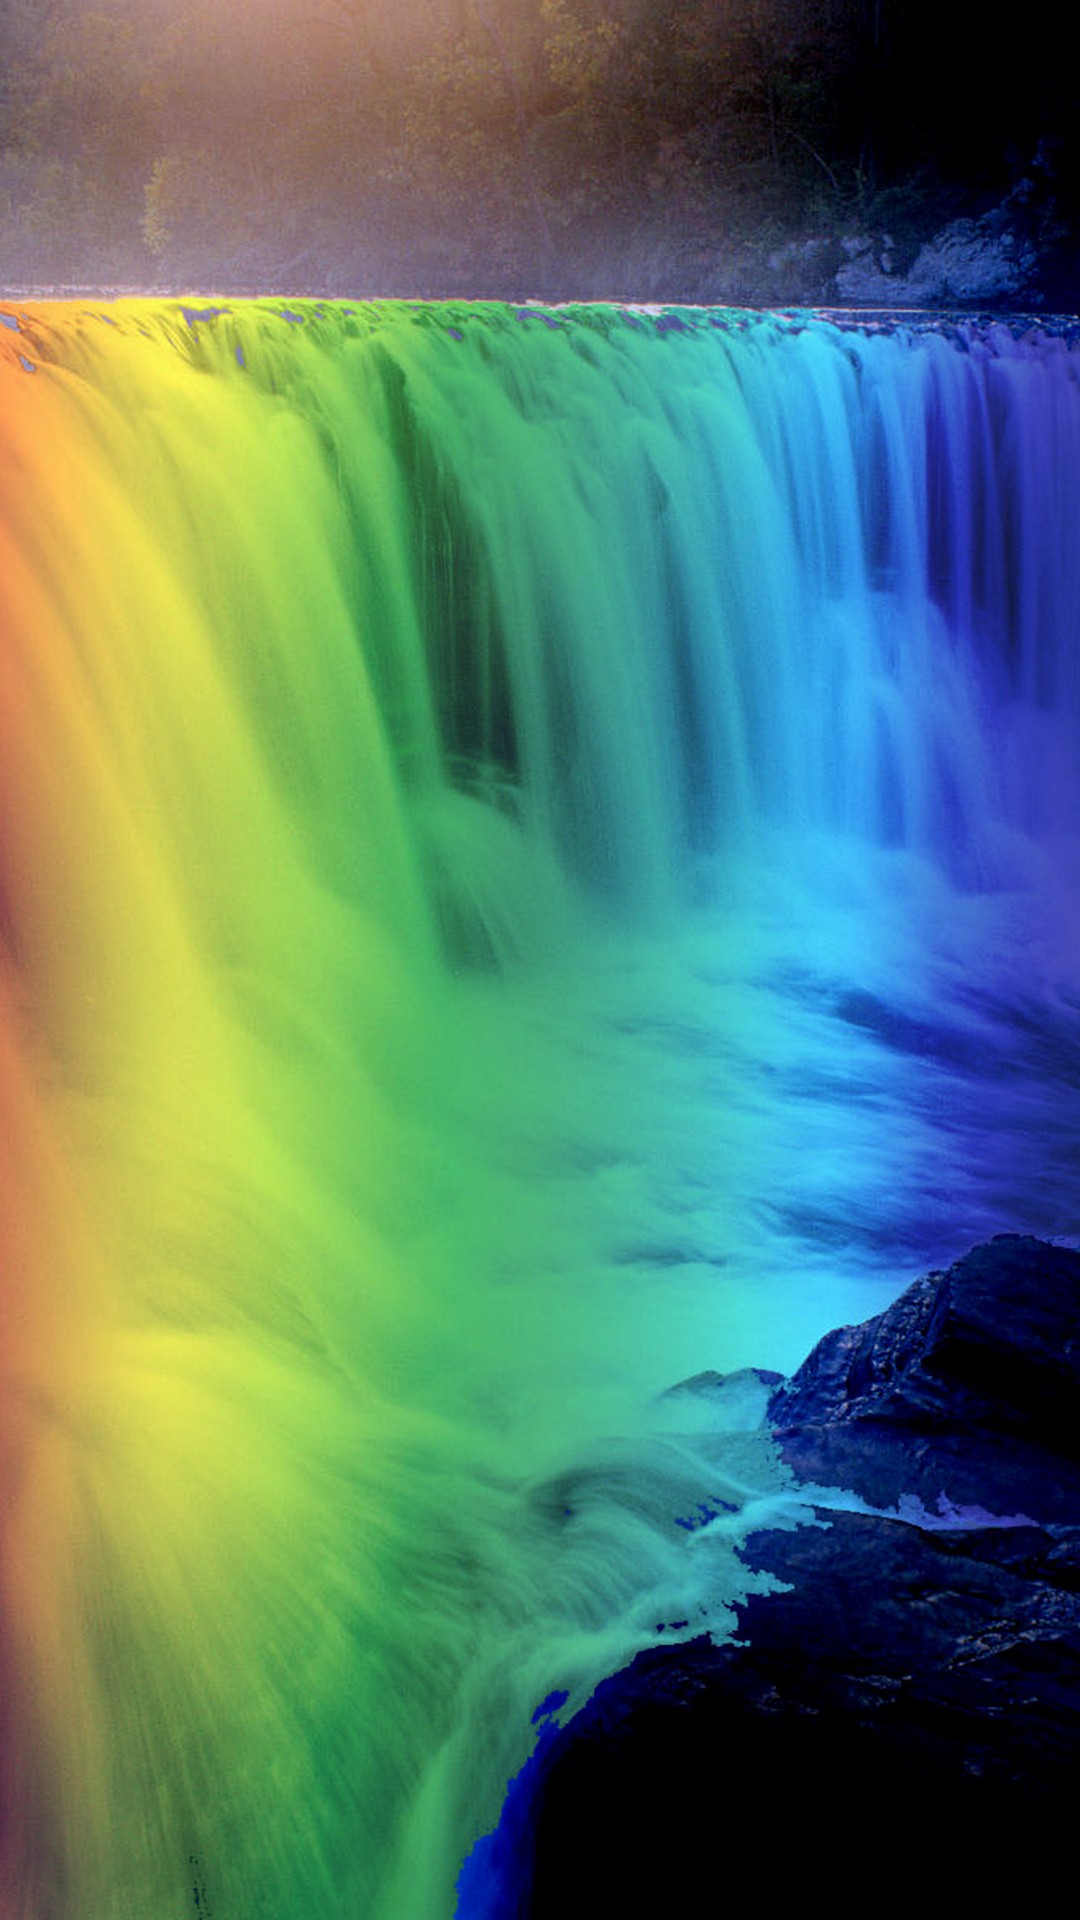 Rainbow Android Wallpaper With Image Resolution Pixel Waterfall Rainbow Tropical Rainforest 1080x19 Wallpaper Teahub Io